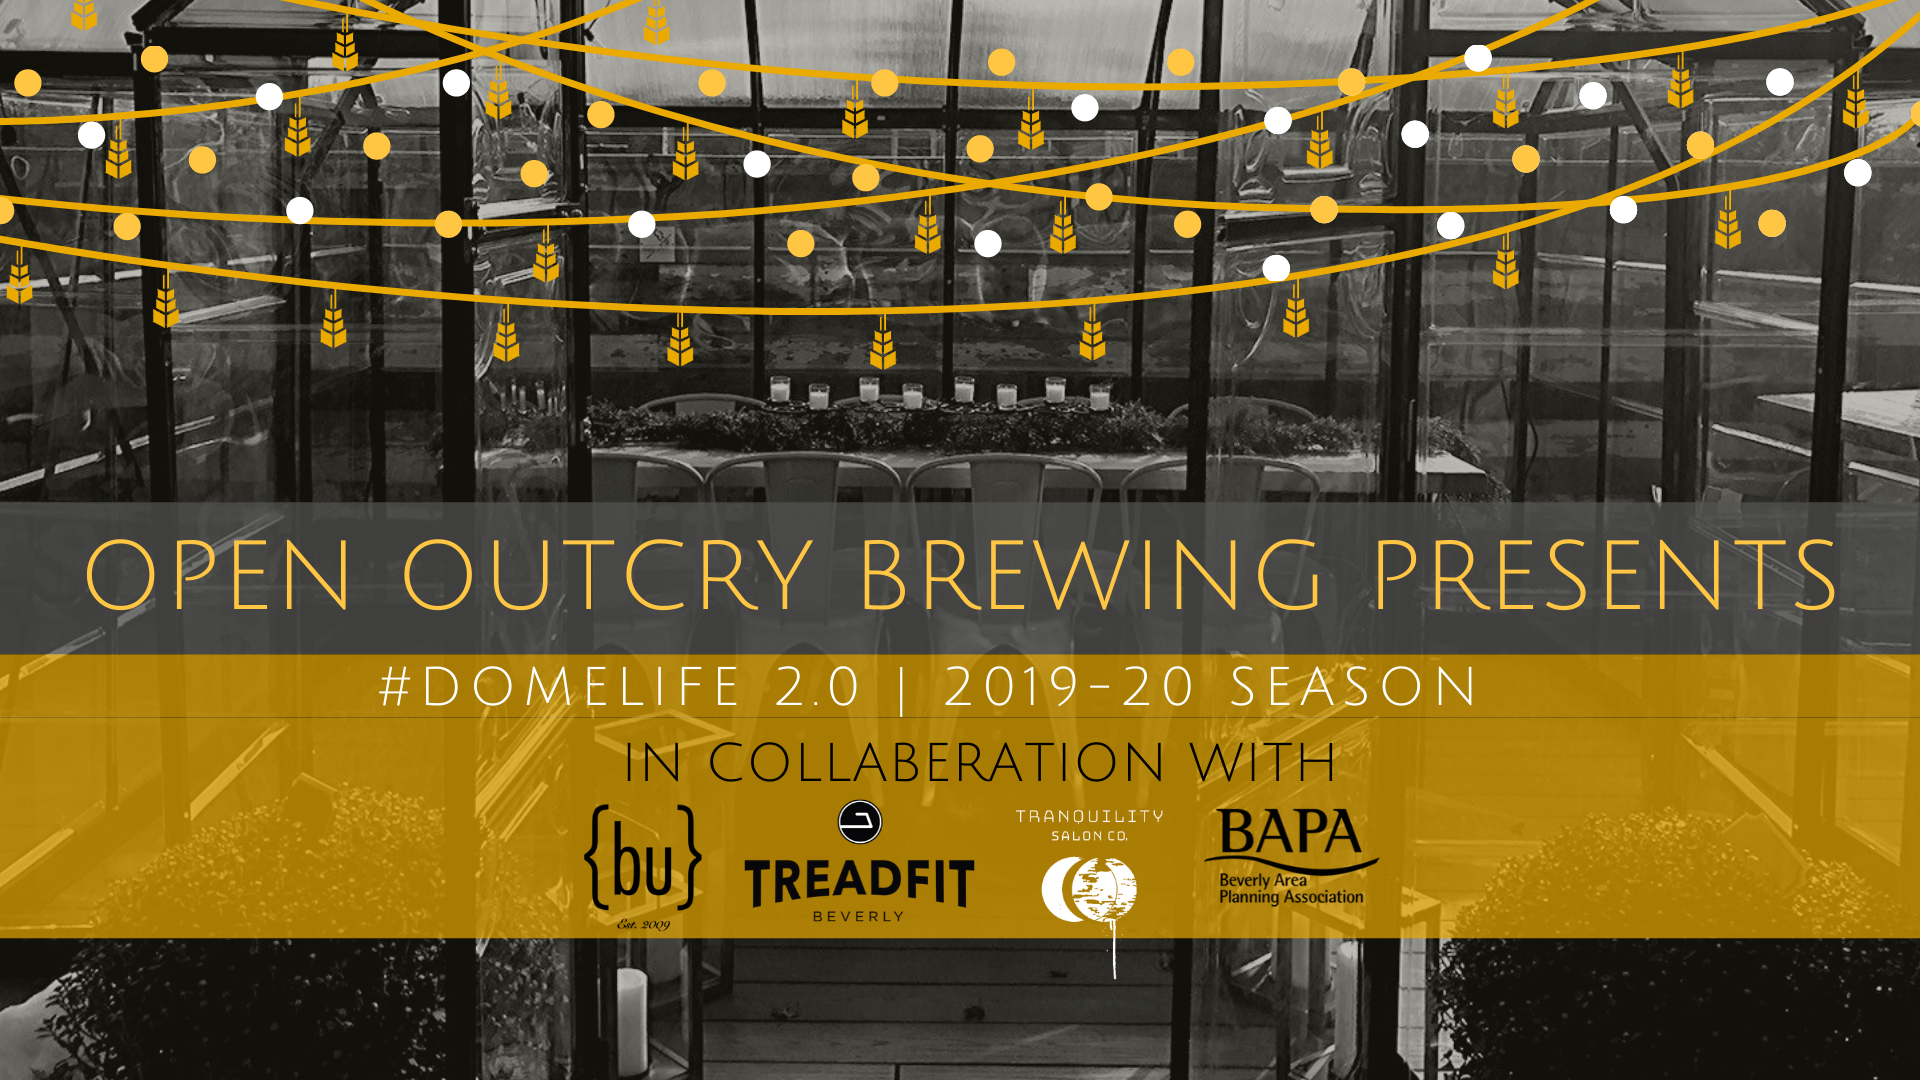 February 2020 #DomeLife 2.0 - An Open Outcry Brewing Rooftop Beer Garden Experience